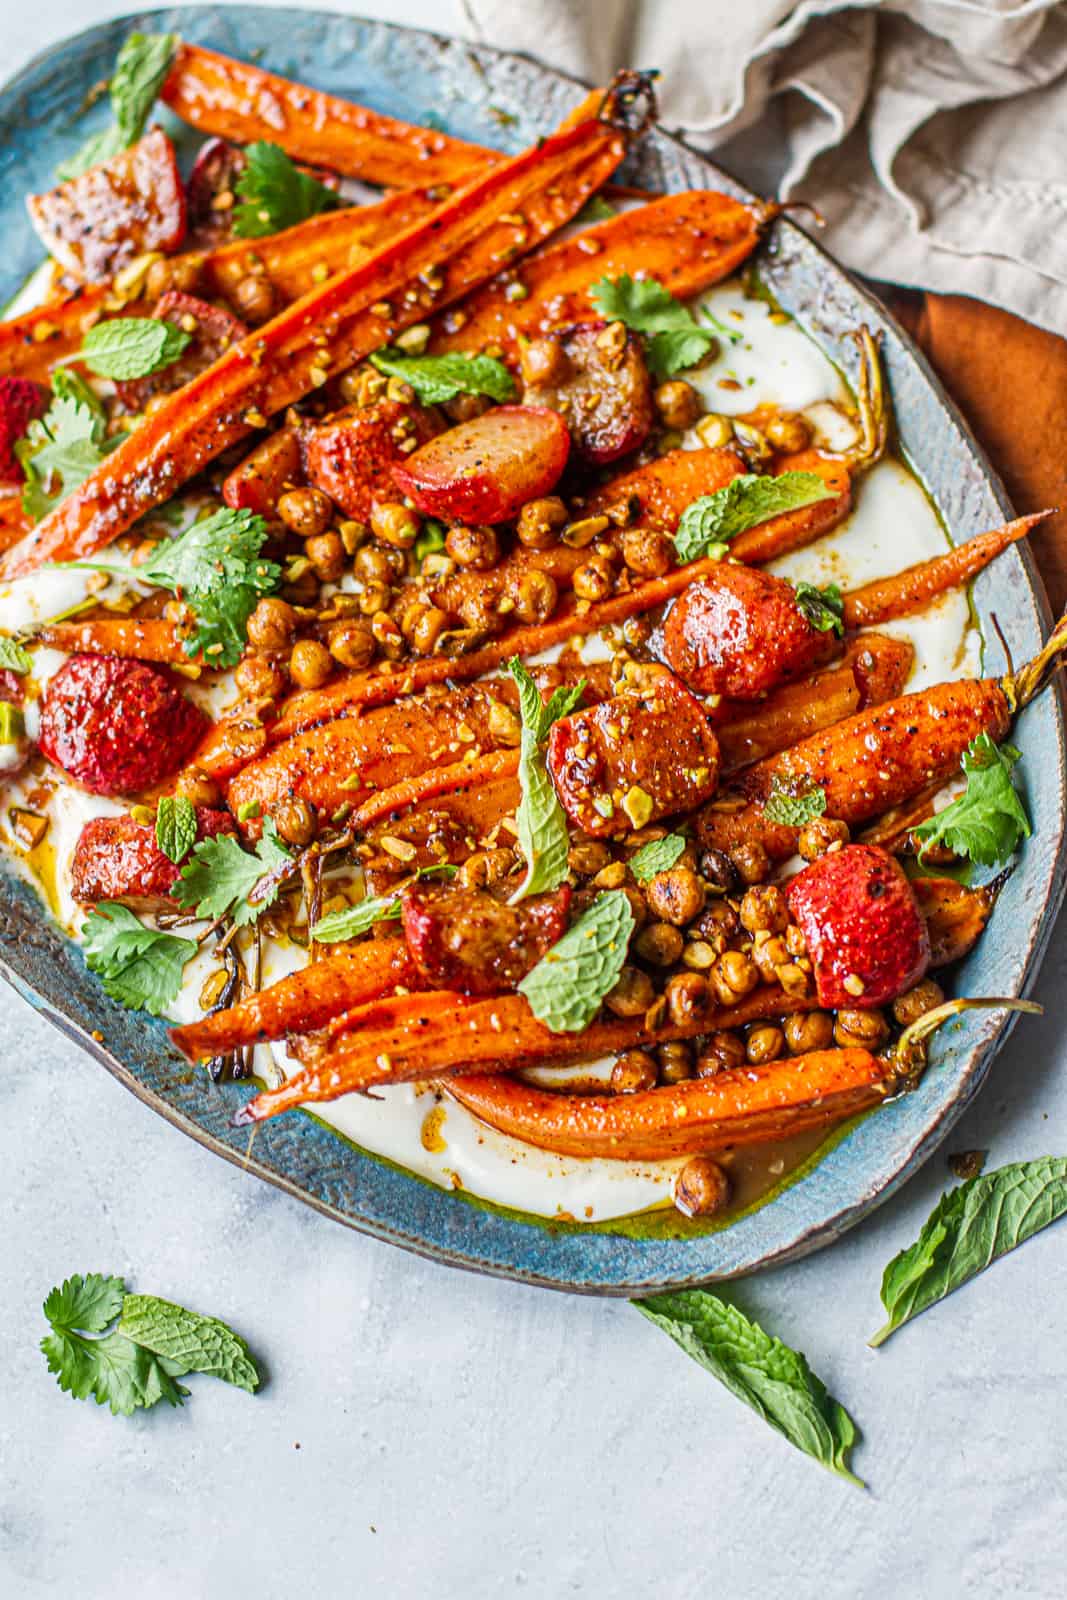 Platter with moroccan-spiced carrot & radish salad over a napkin